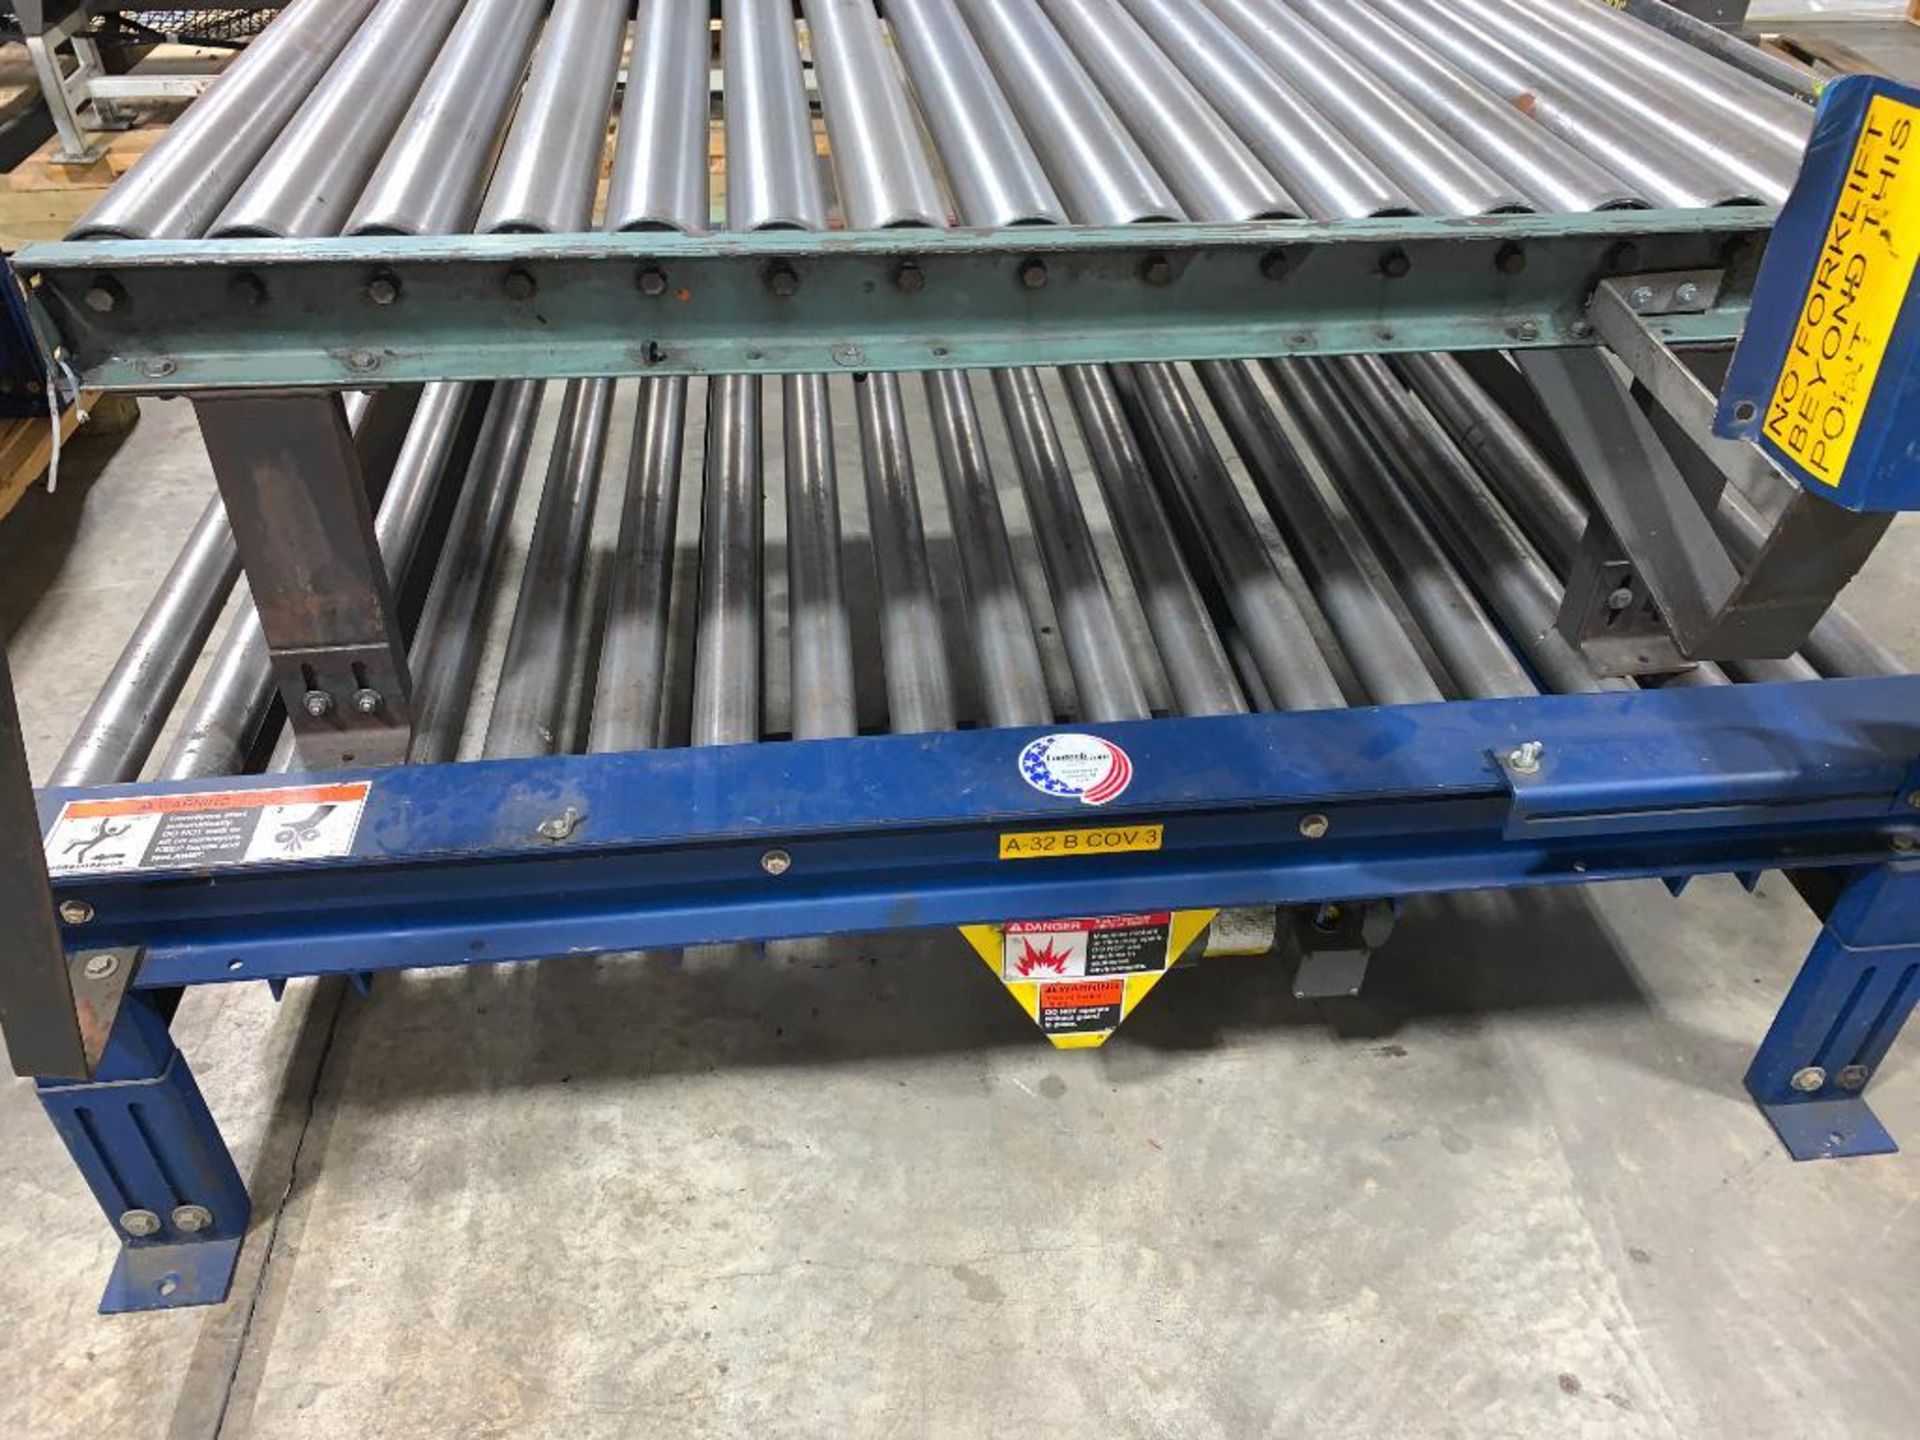 (6) skids of Lantech full pallet conveyor including turntable section - Located in Tifton, GA - Image 14 of 19